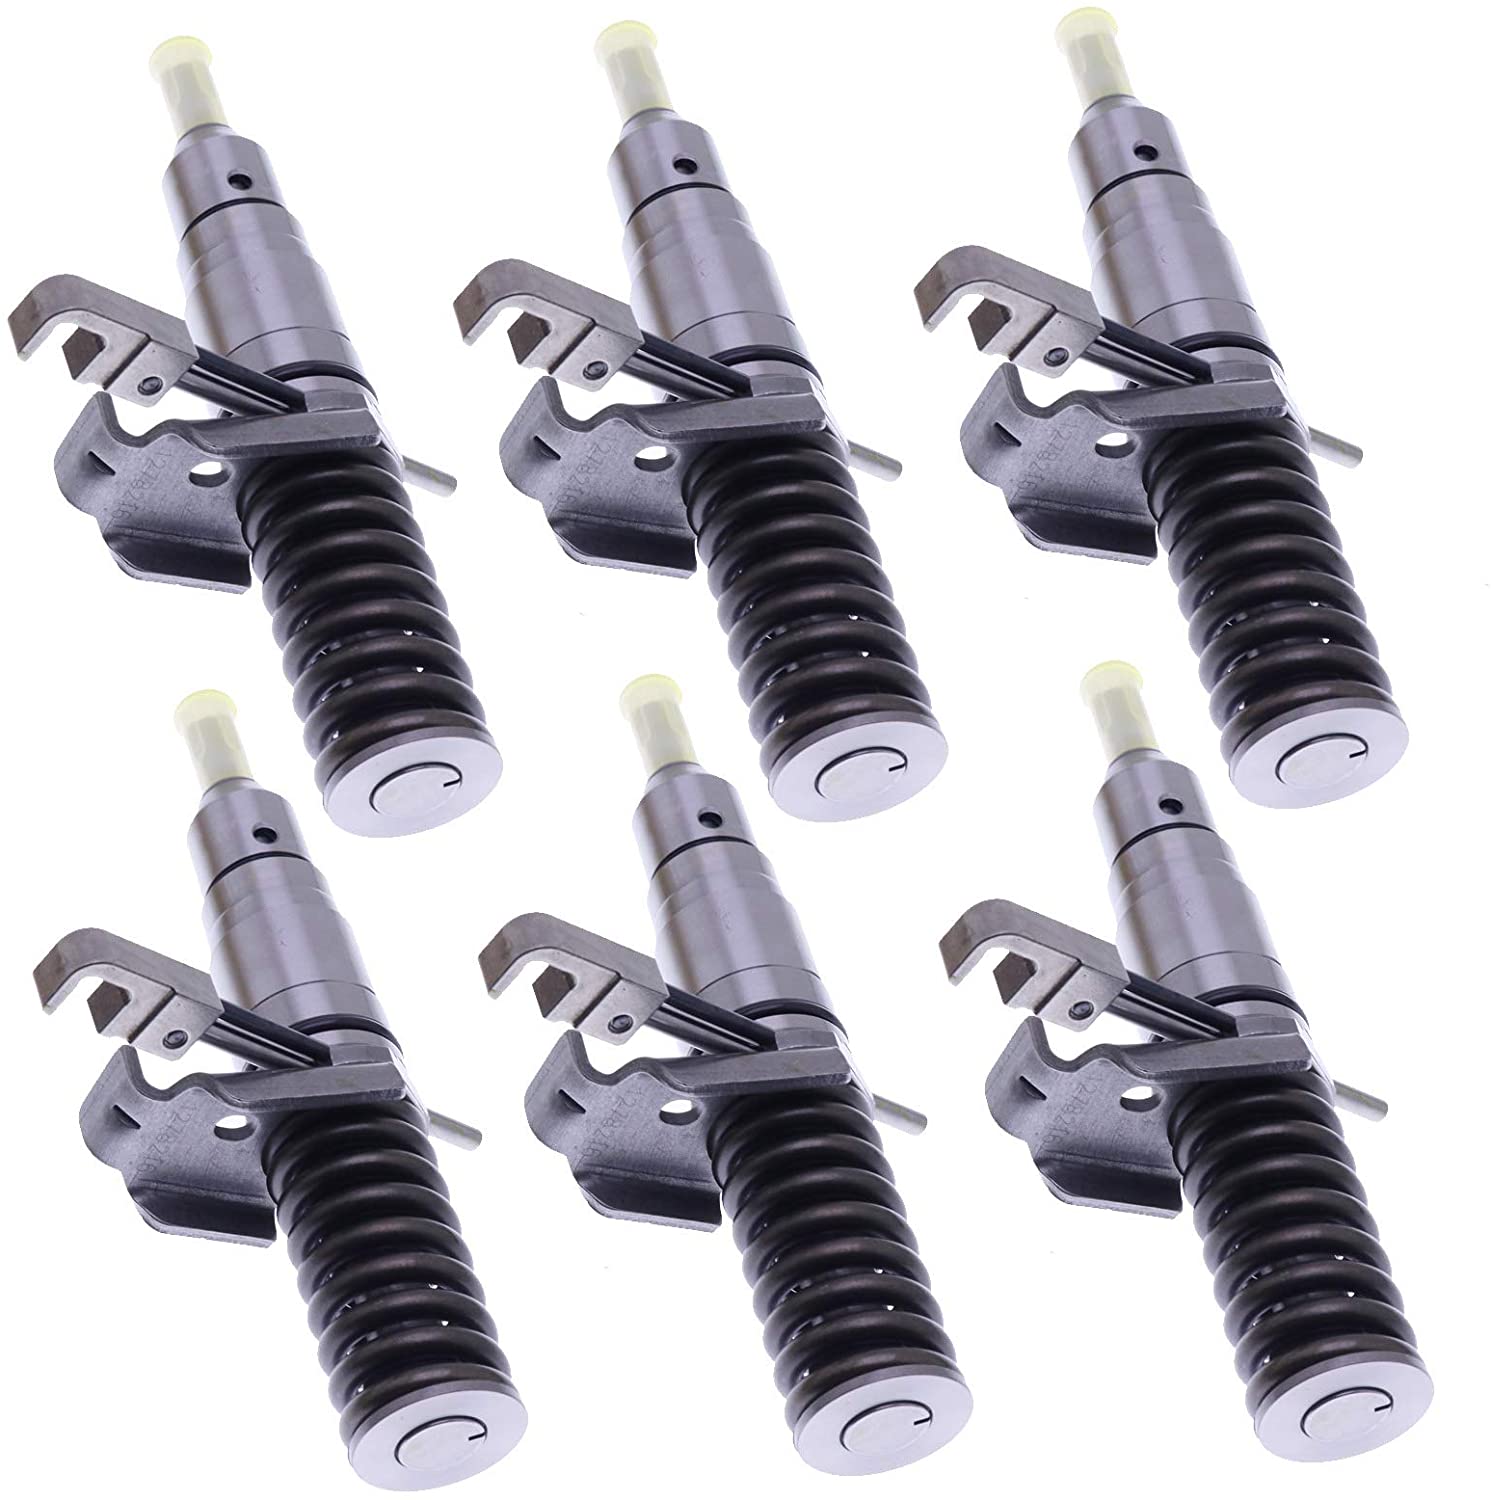 6PCS Fuel Injector 107-7732 127-8216 0R-8682 compatible with Caterpillar 3114 3116 AP-1000 AP-1000B AP-1055B AP-900B BG-2455C BG-245C 446B 446D 320B 322B 322B L 322B LN 322C 322C FM 325B - KUDUPARTS